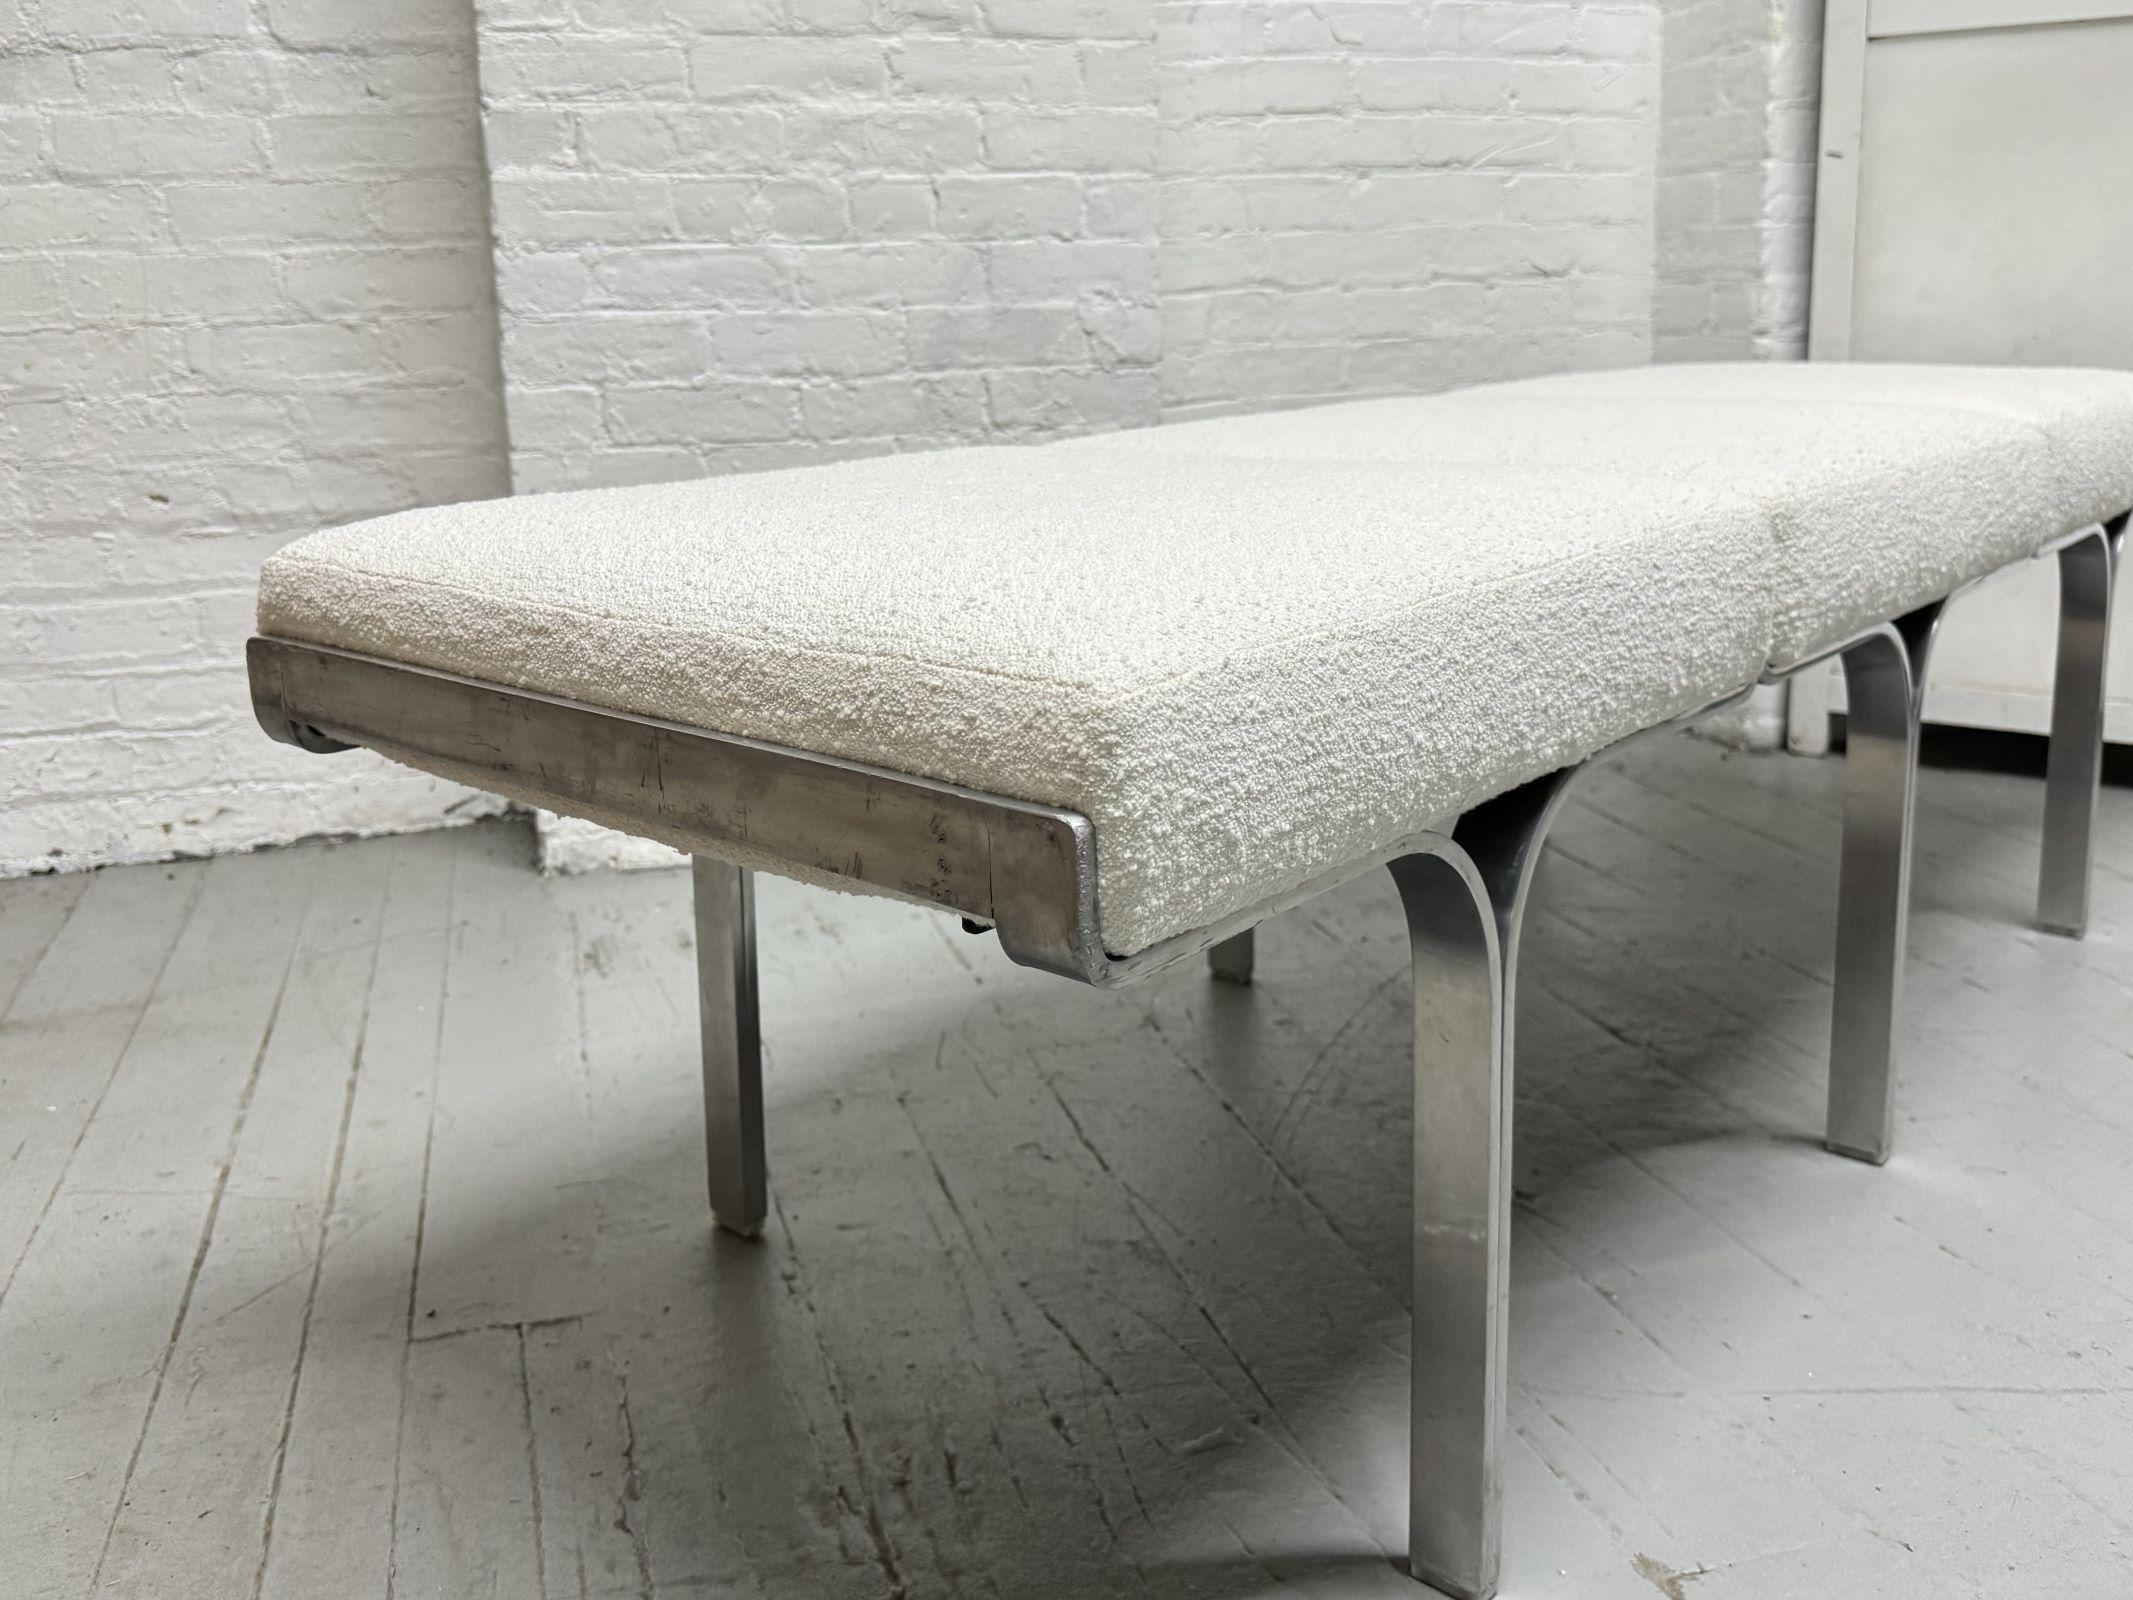 John Behringer 3-Seat Bench in Bouclé Mid Century Modern In Good Condition For Sale In New York, NY